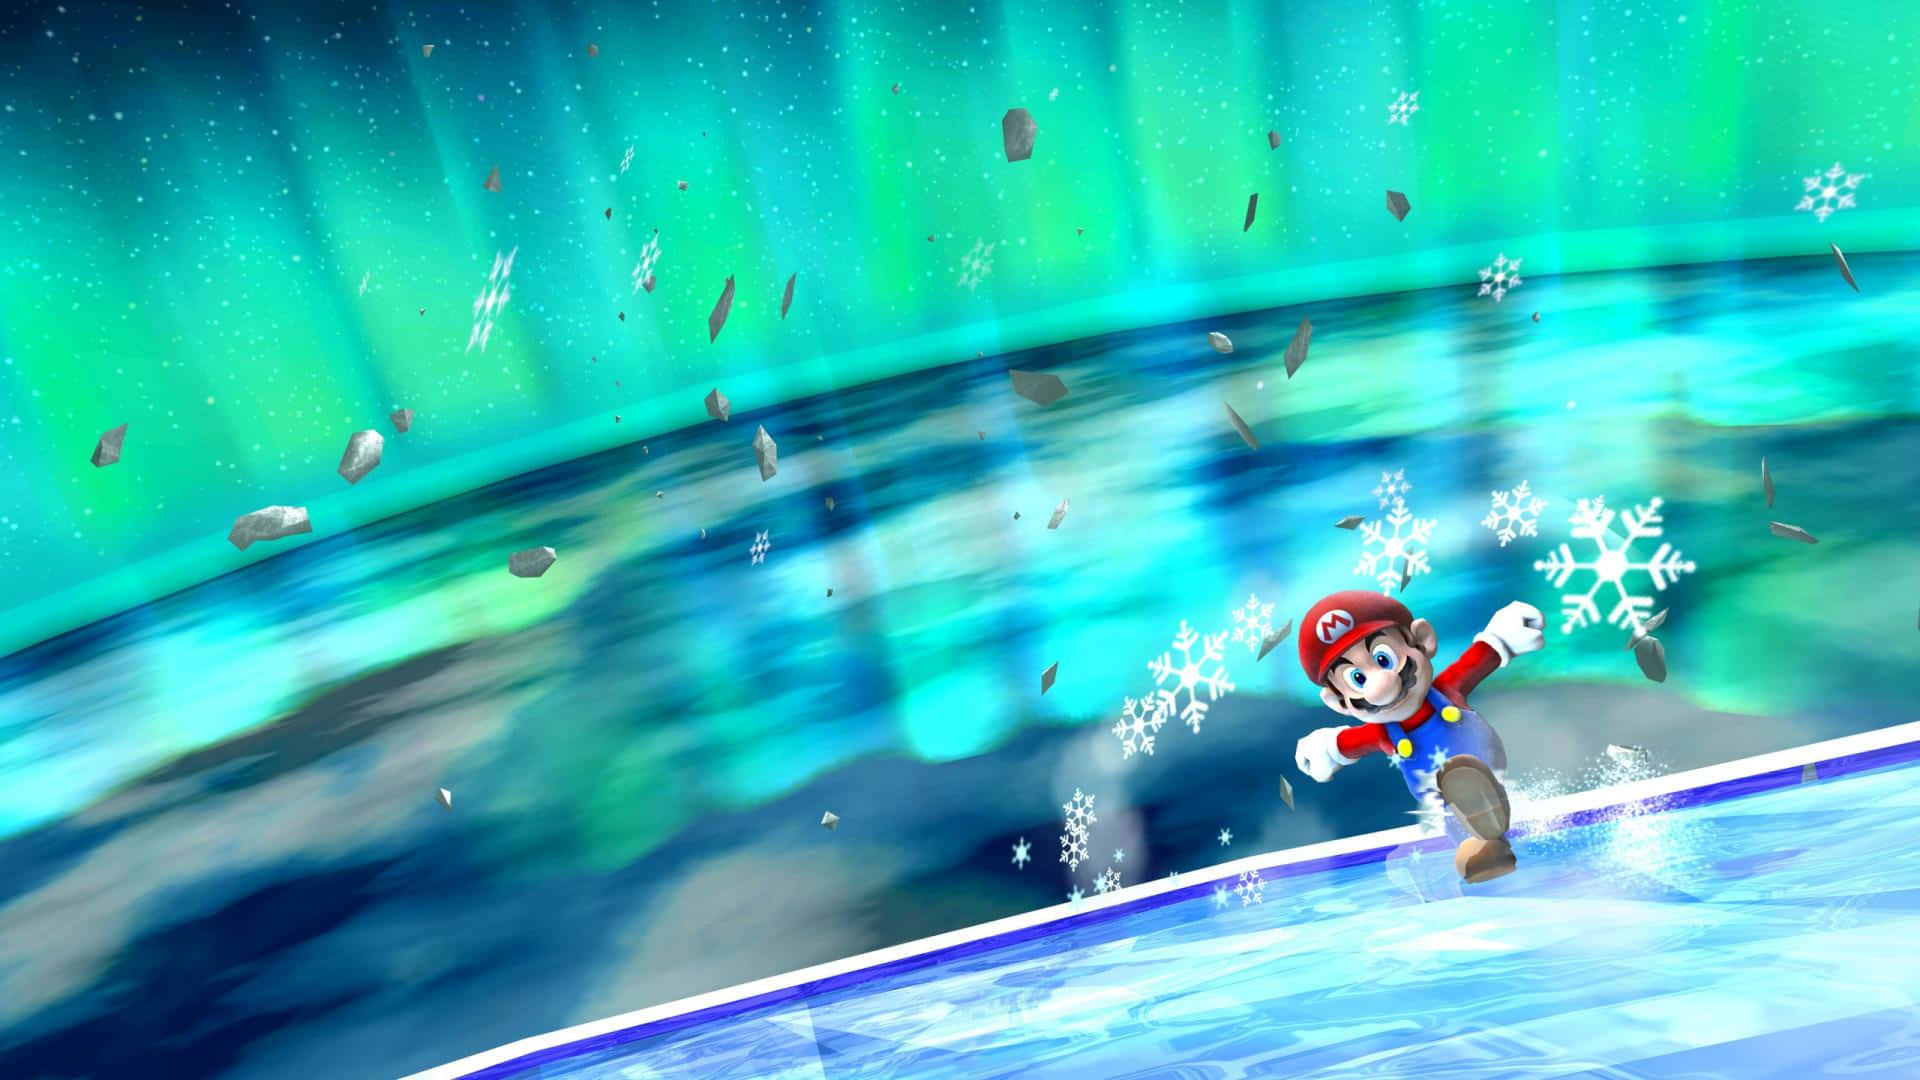 Lisa and Luise explore the vibrant and stunning universe of Super Mario Galaxy! Wallpaper